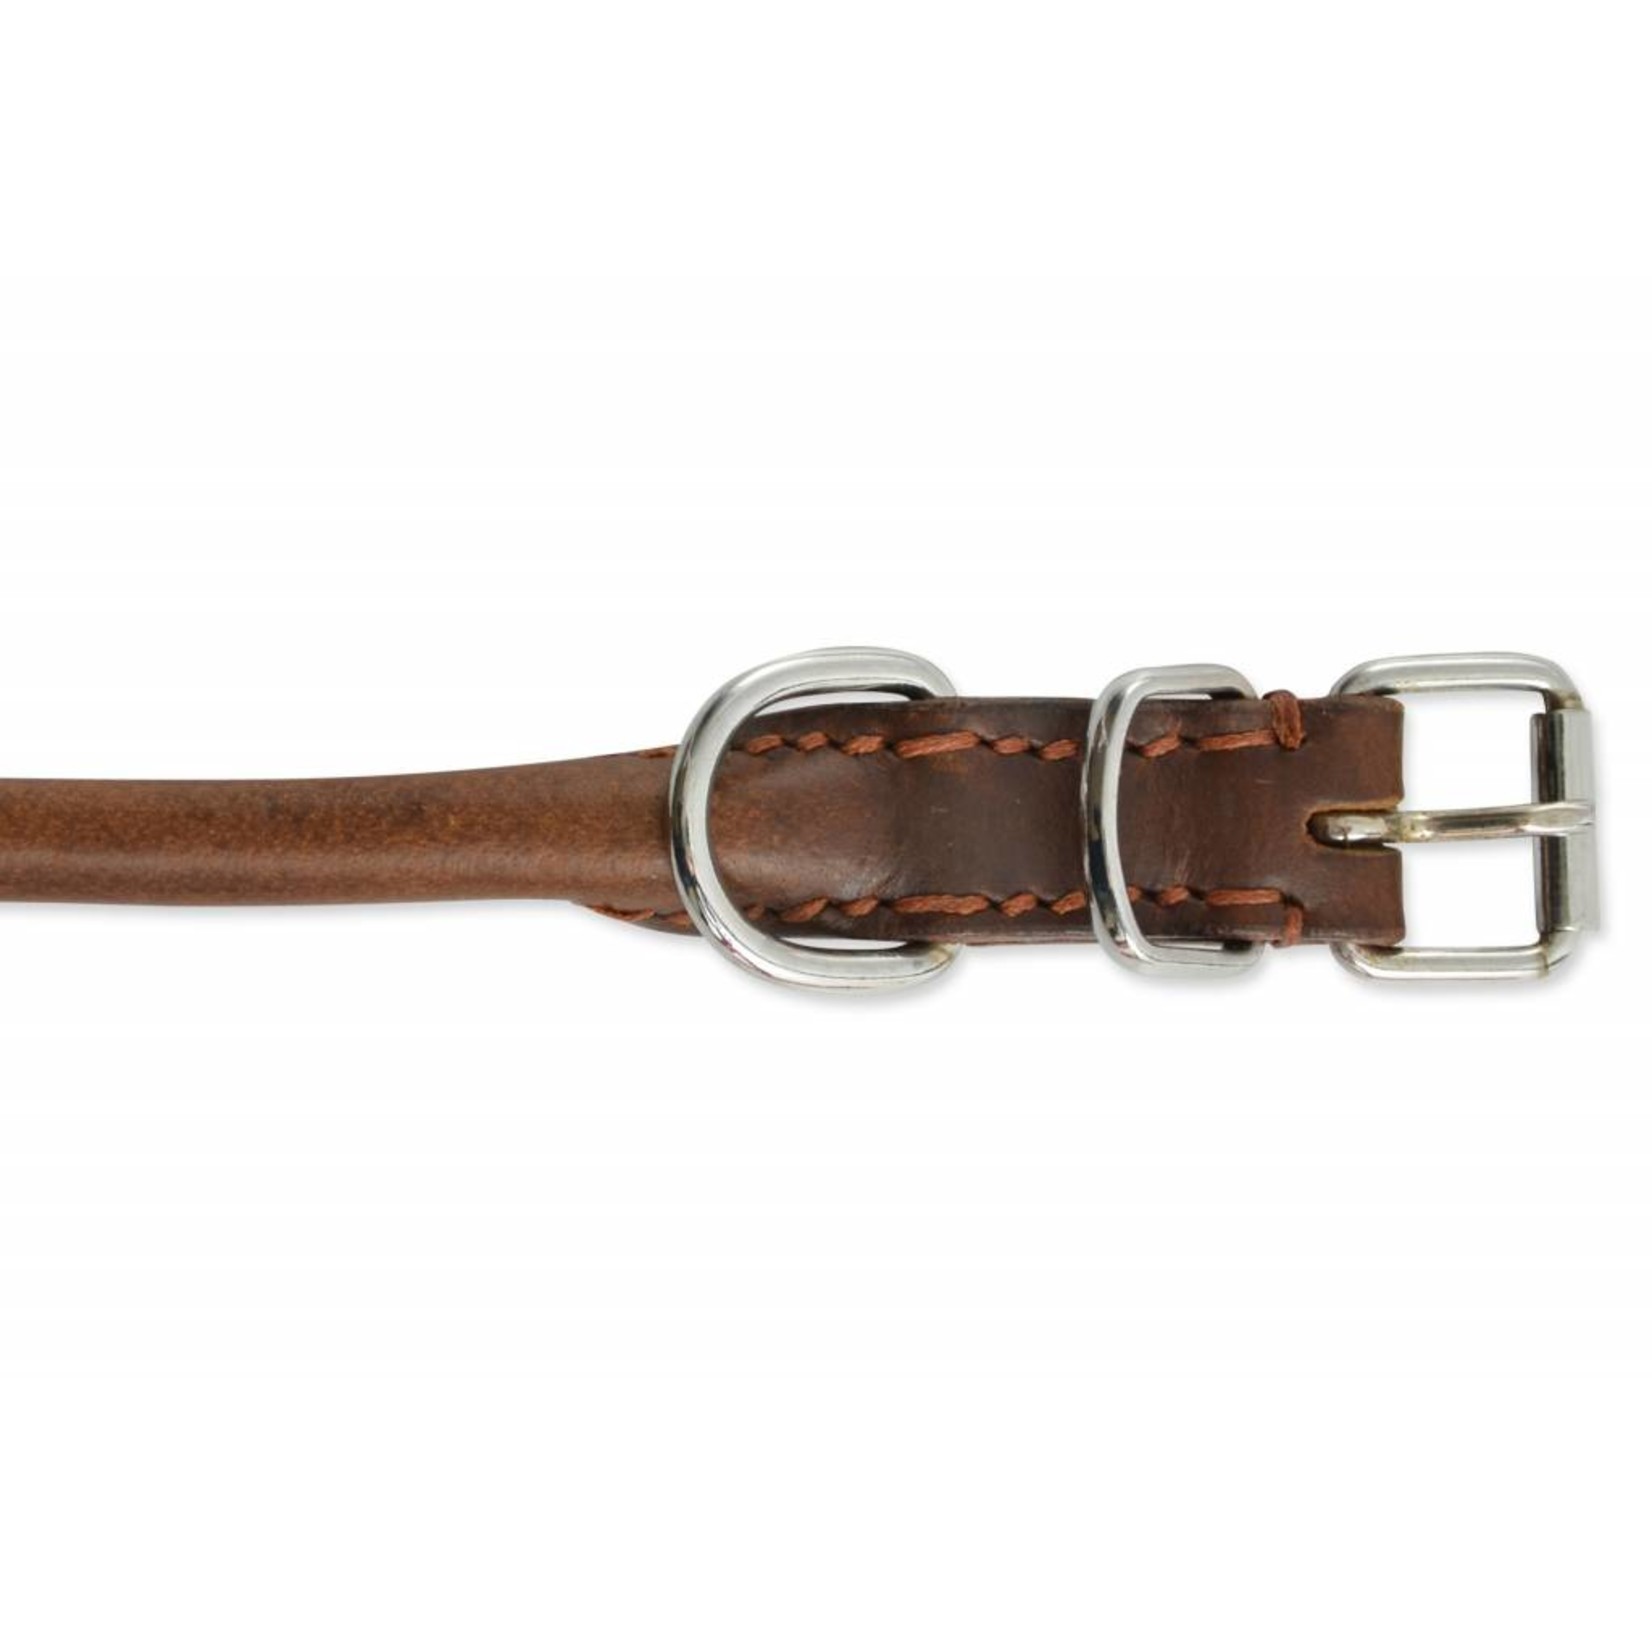 Ancol Heritage Round Sewn Leather Dog Collar, Chestnut